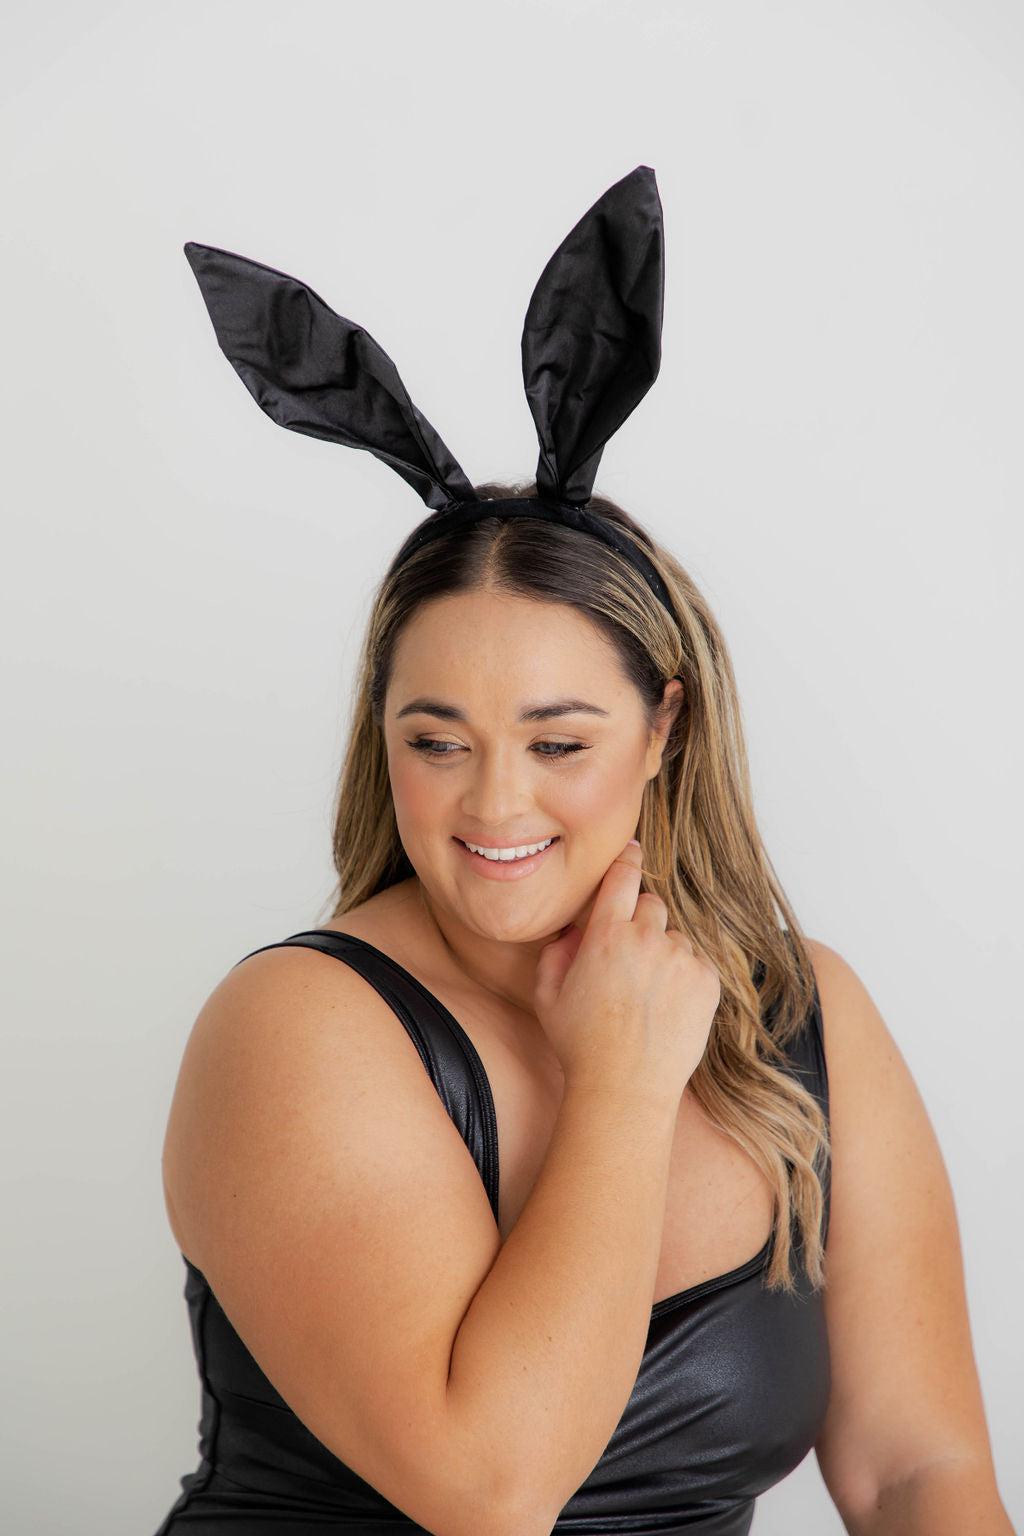 Satin Black Bunny Ears - $22.00 - Accessories - Naked Curve